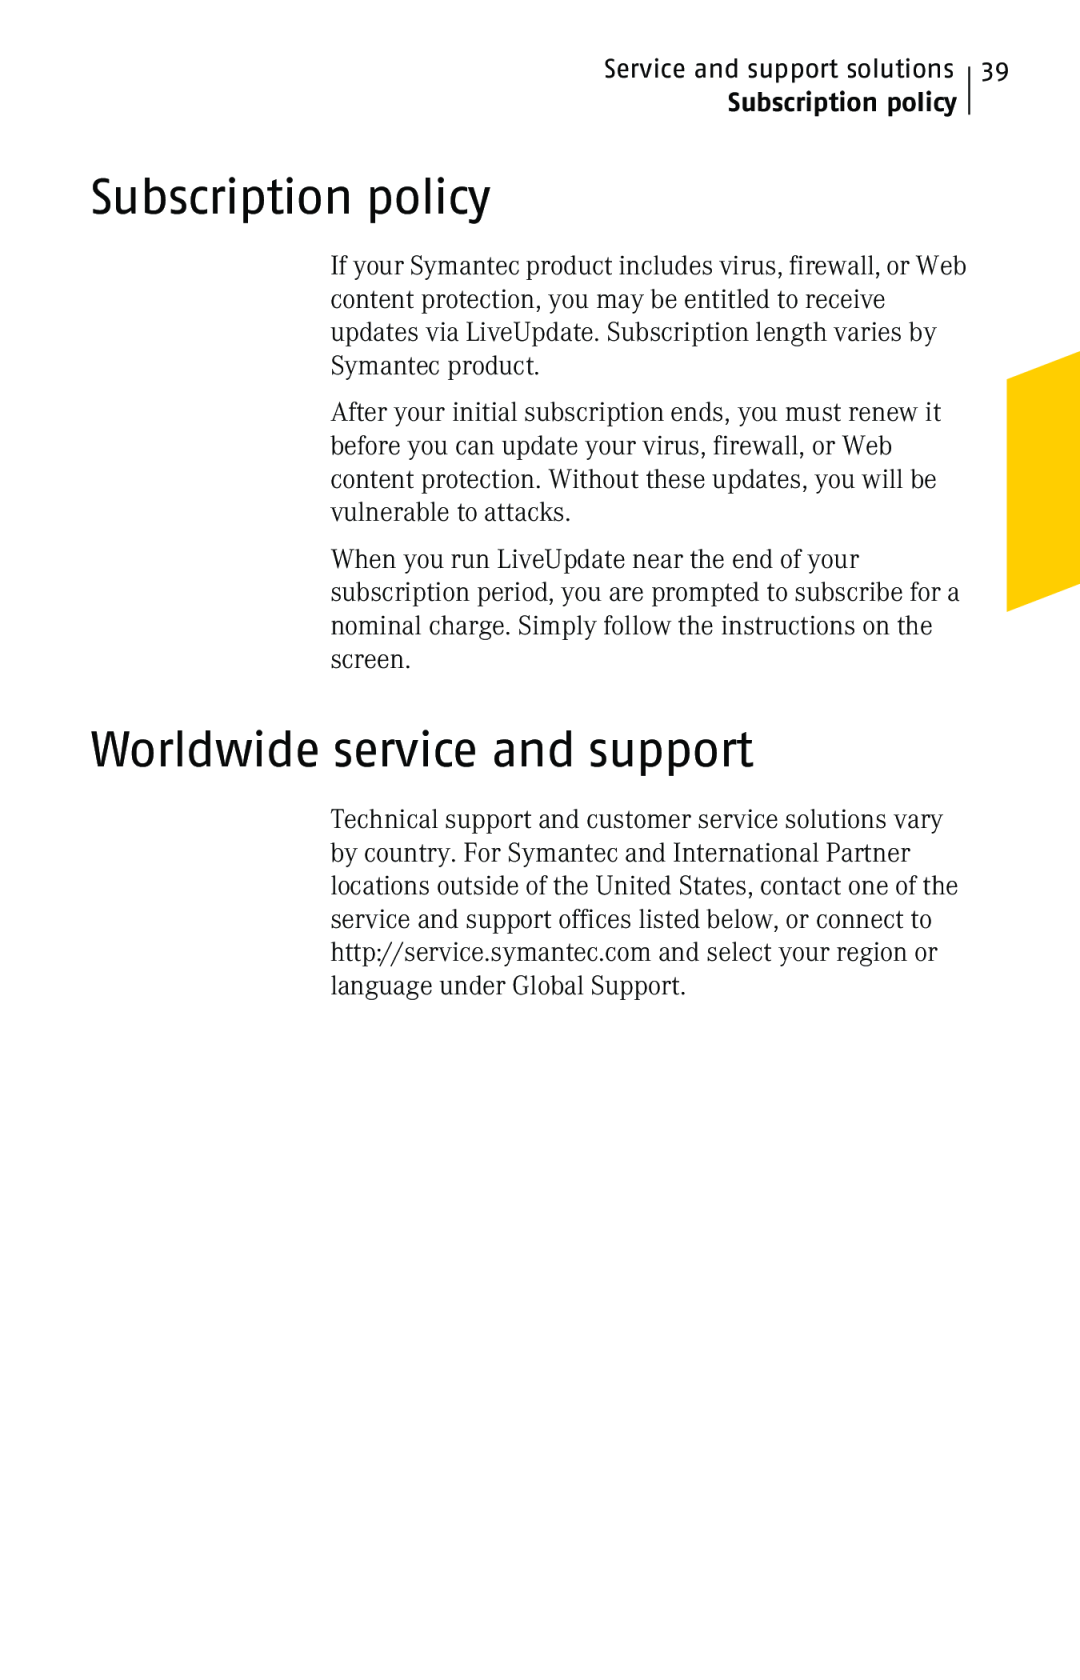 Symantec 10 manual Subscription policy, Worldwide service and support 